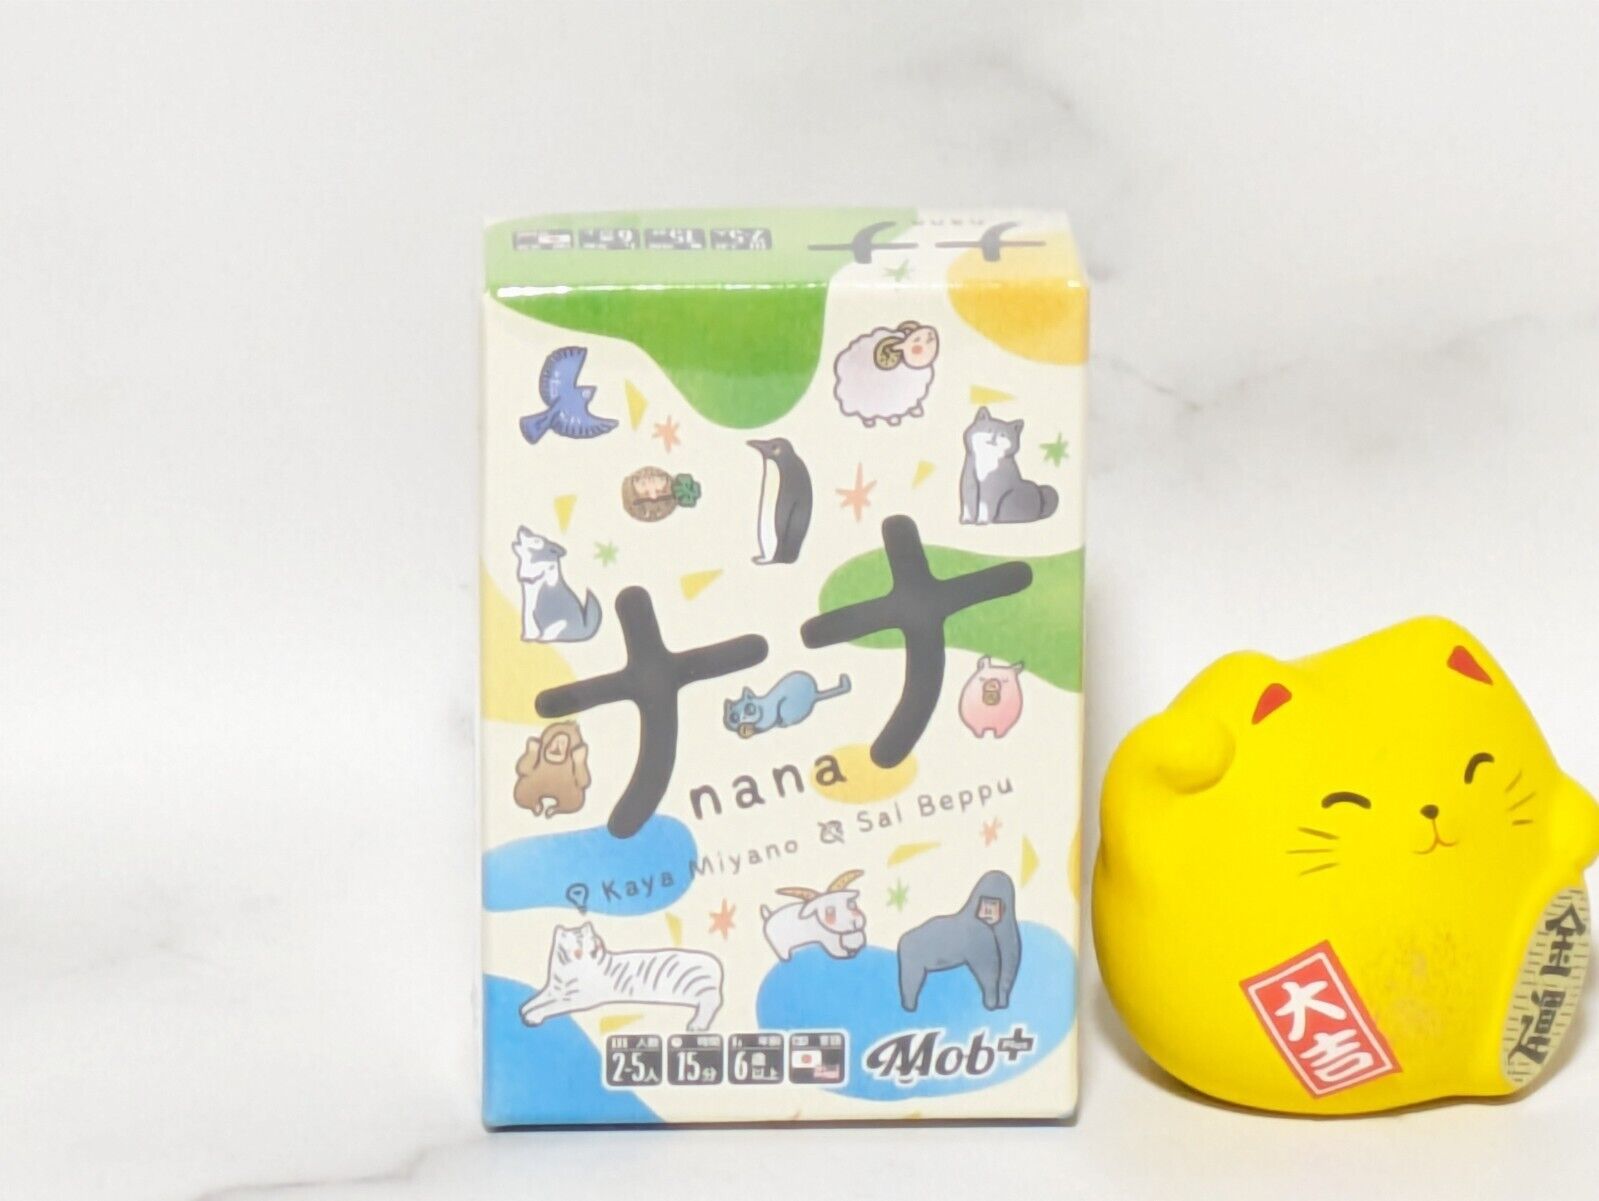 Mob+ Nana Card Game 3rd Edition board game for 2-5 players Japan